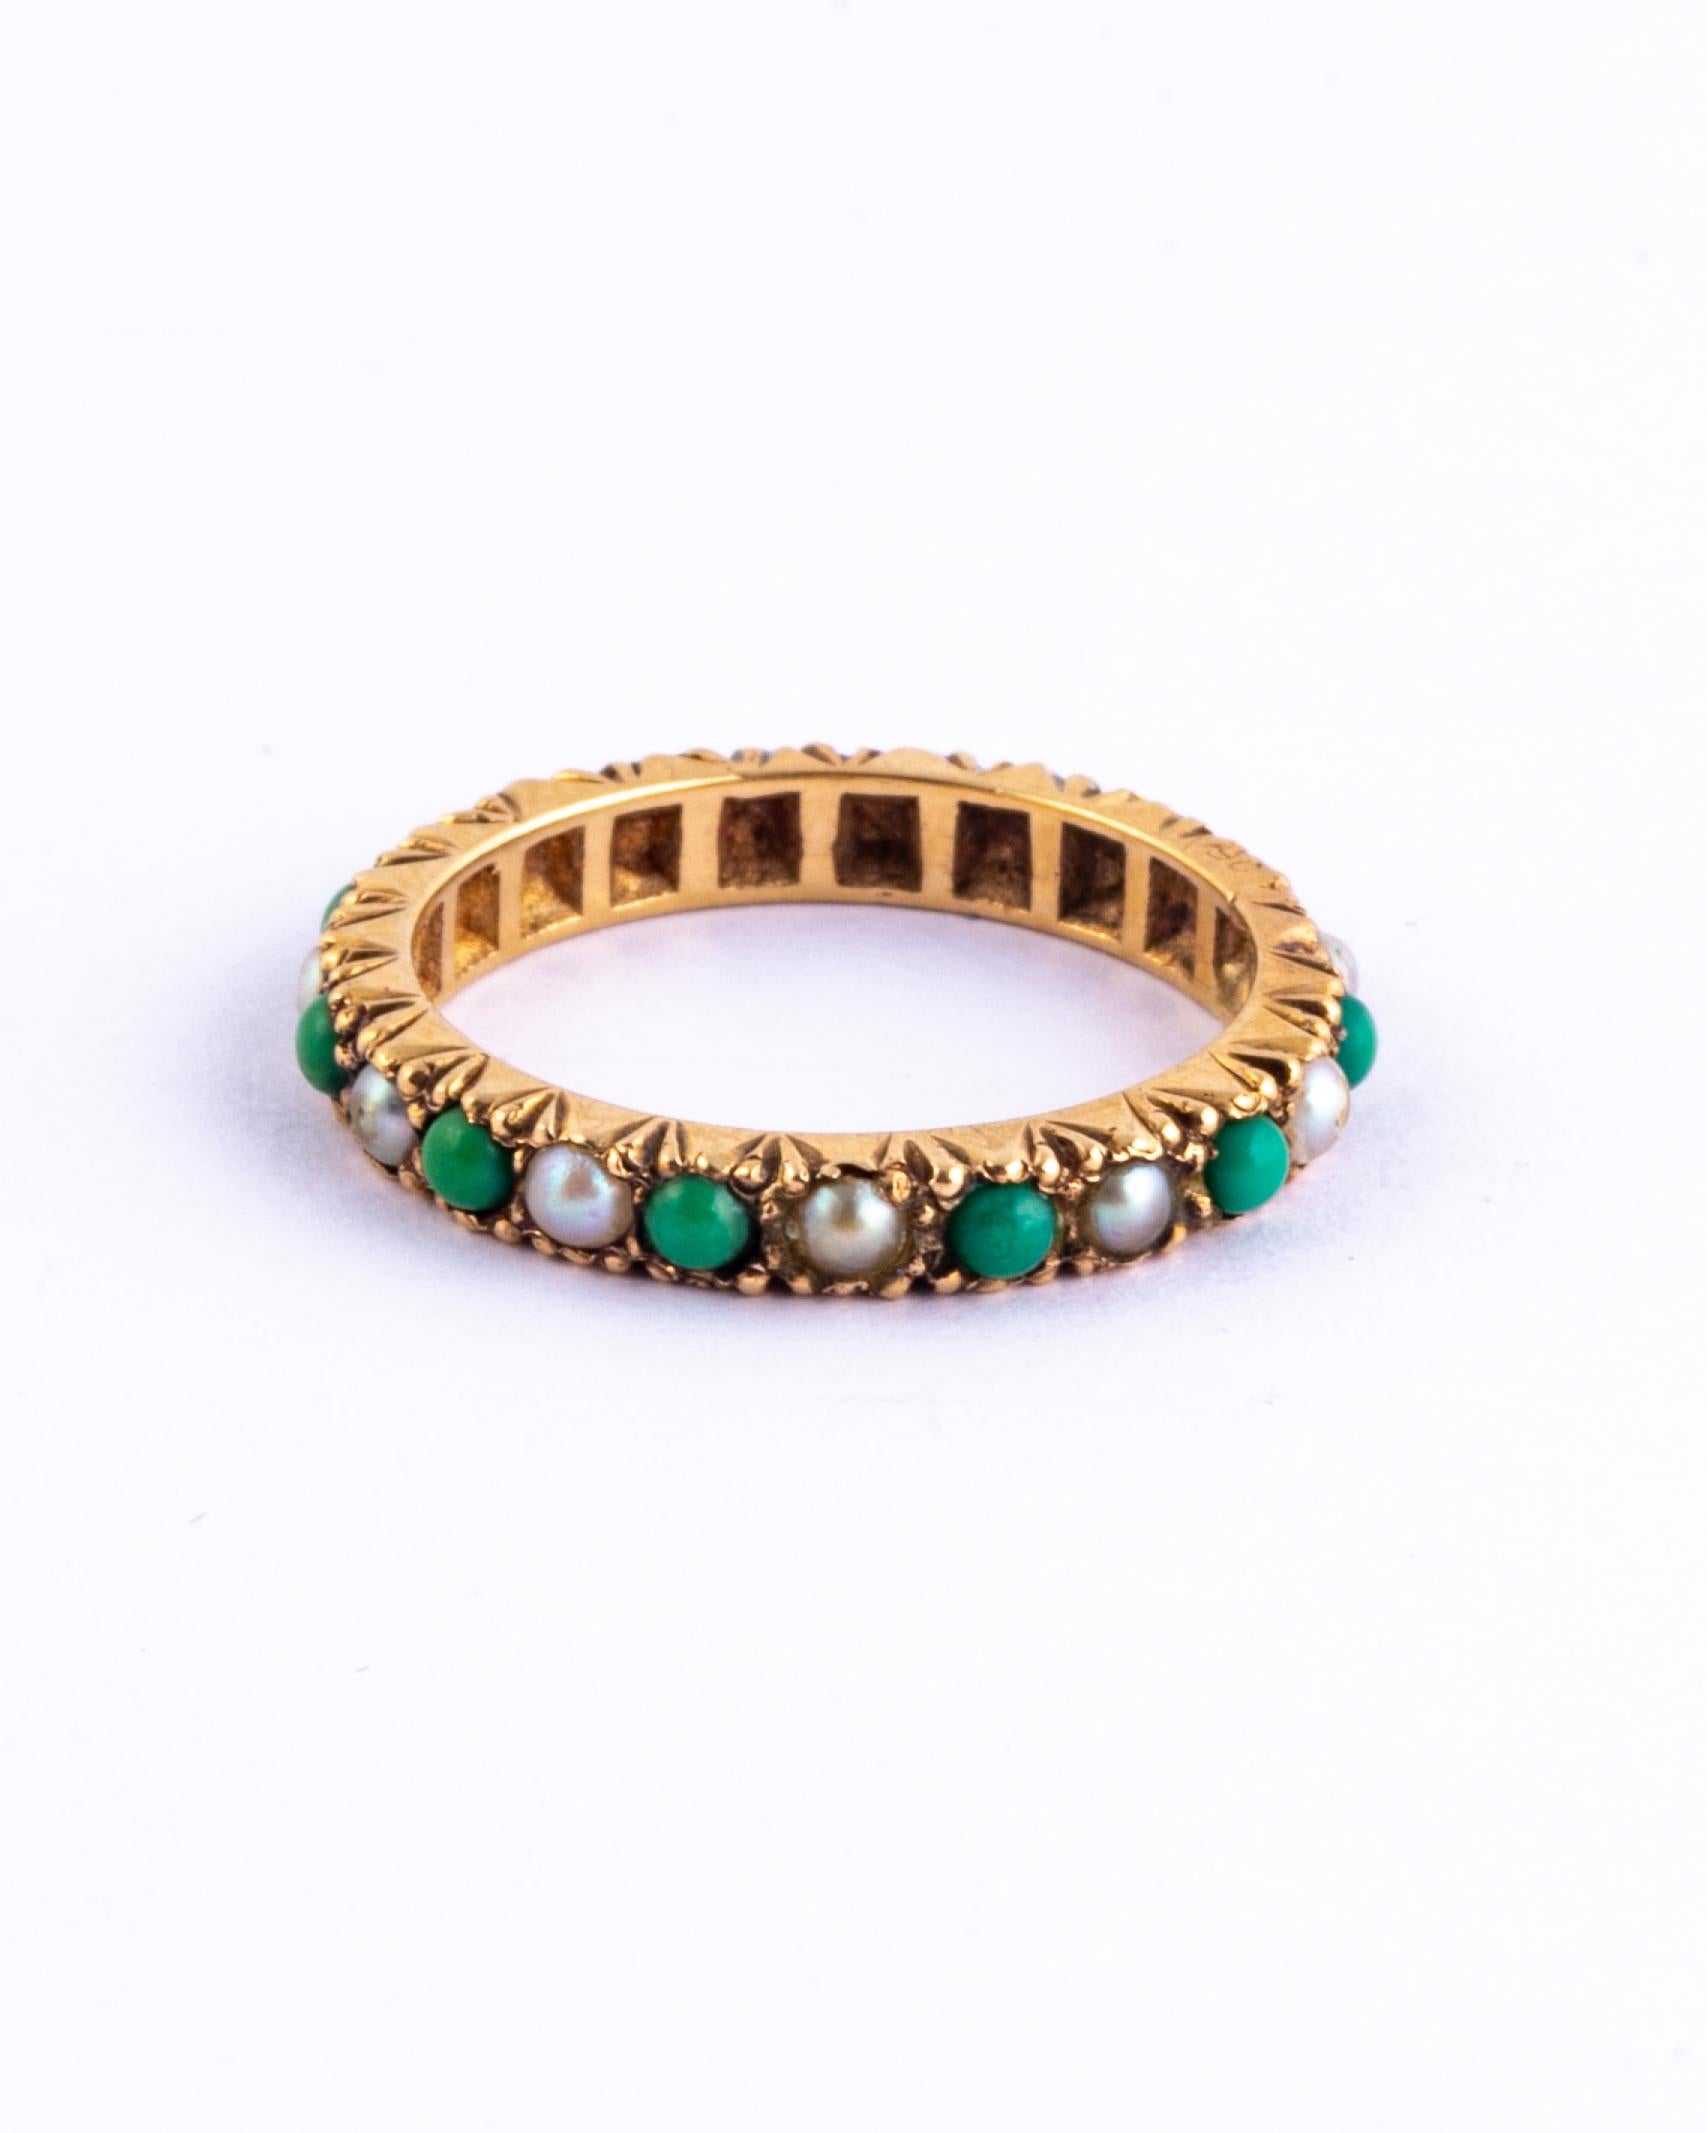 This ring is an absolute stunner! You don't find this style of ring very often. The 9 carat gold band hold pearls and turquoise stones each held in simple claw settings. There is engraved detail on the side of the band. 

Ring Size: M 1/2 or 6 1/2